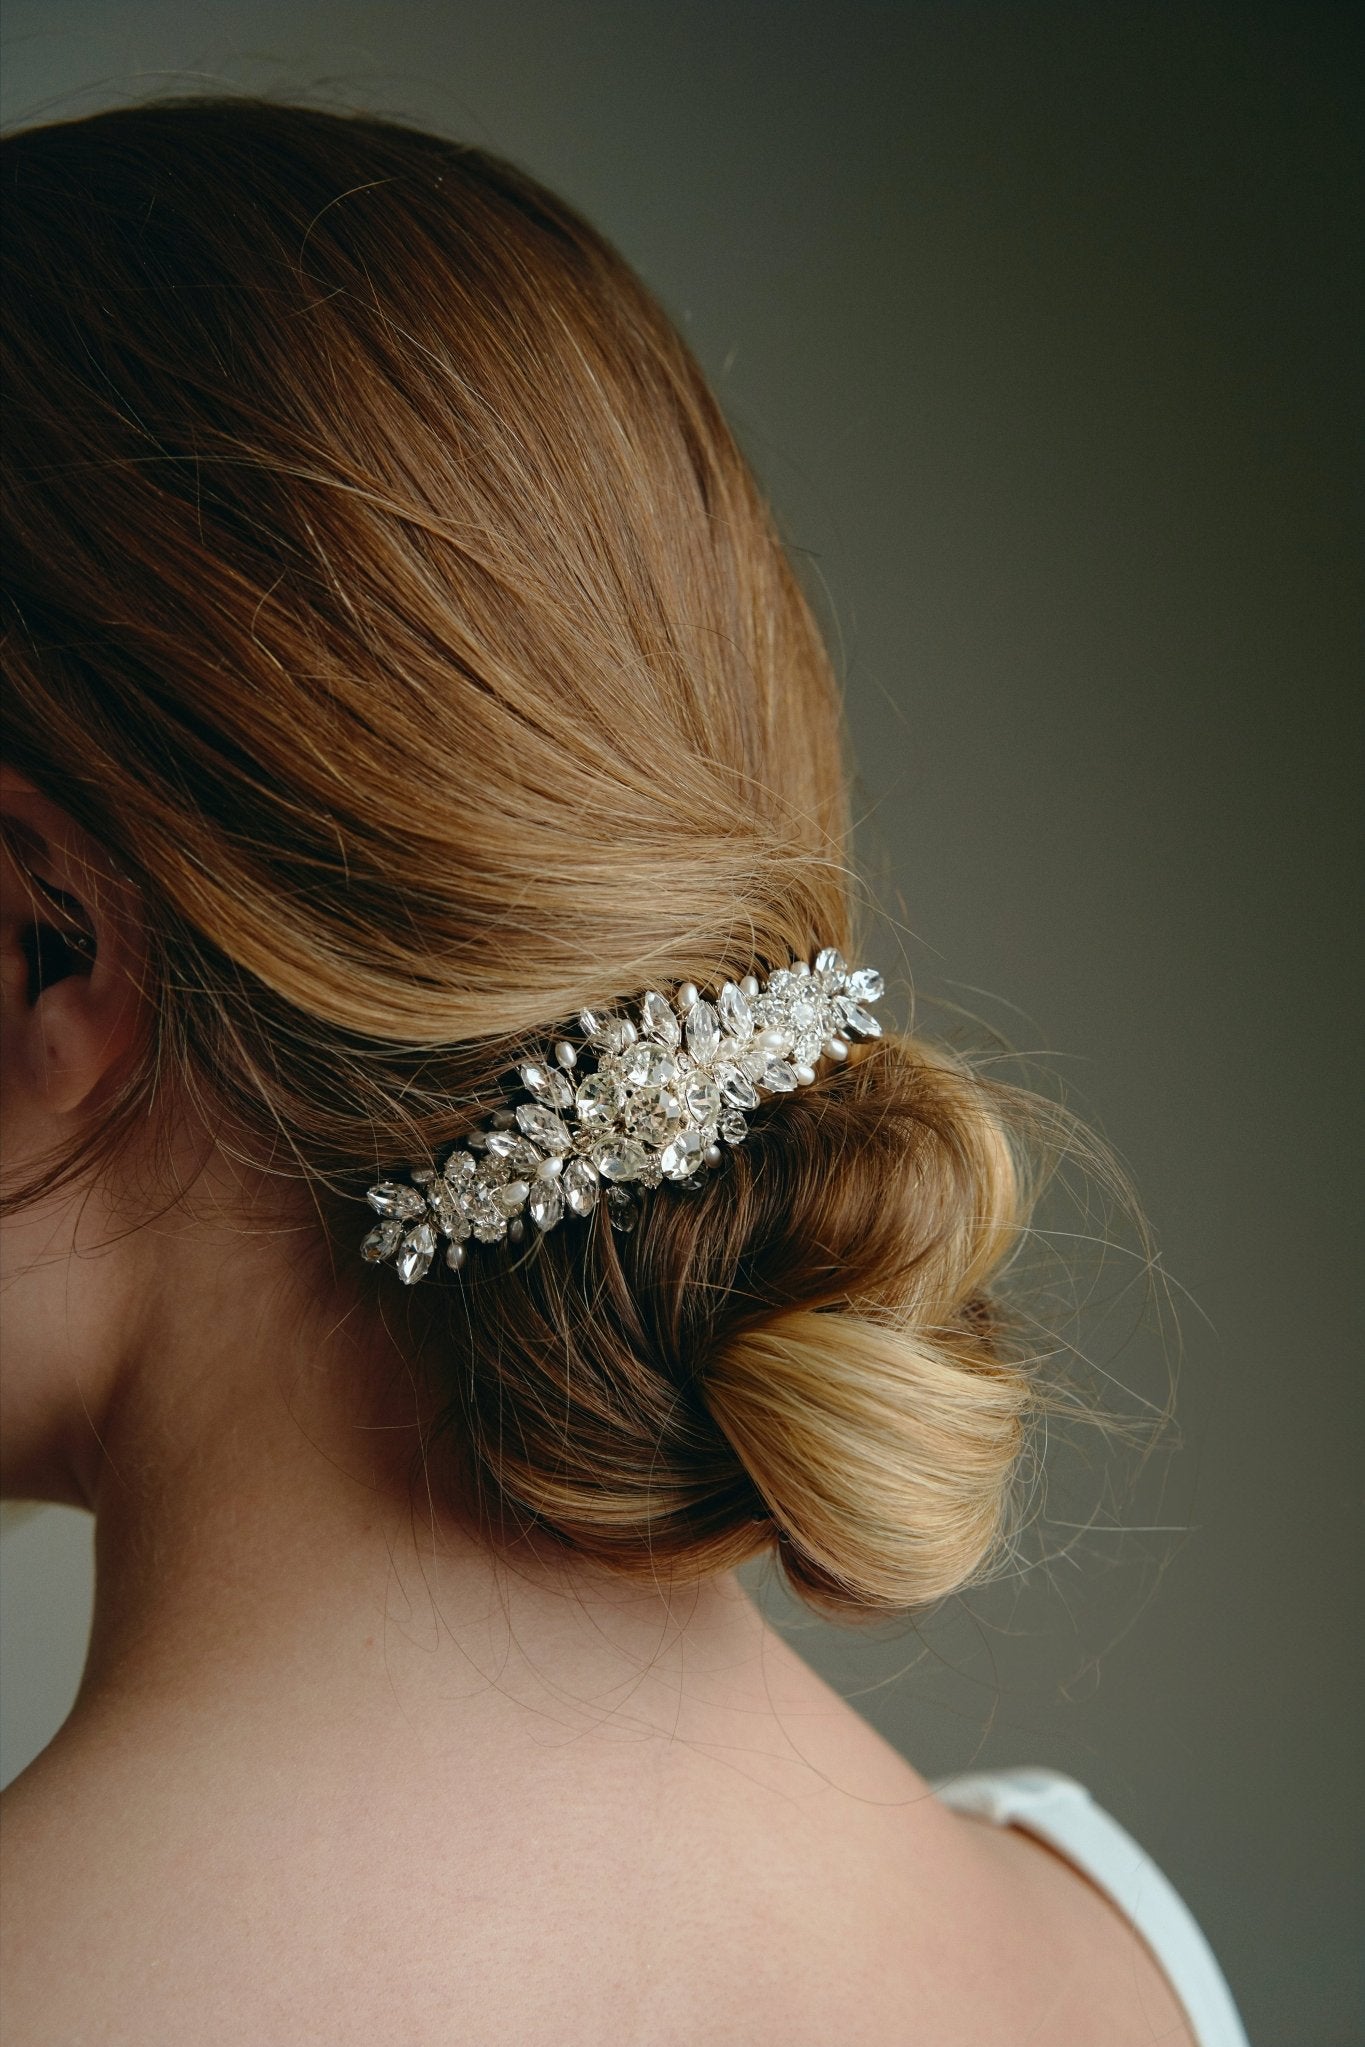 Bridal hair comb with silver crystals and freshwater pearls worn by a bride with a low bun updo